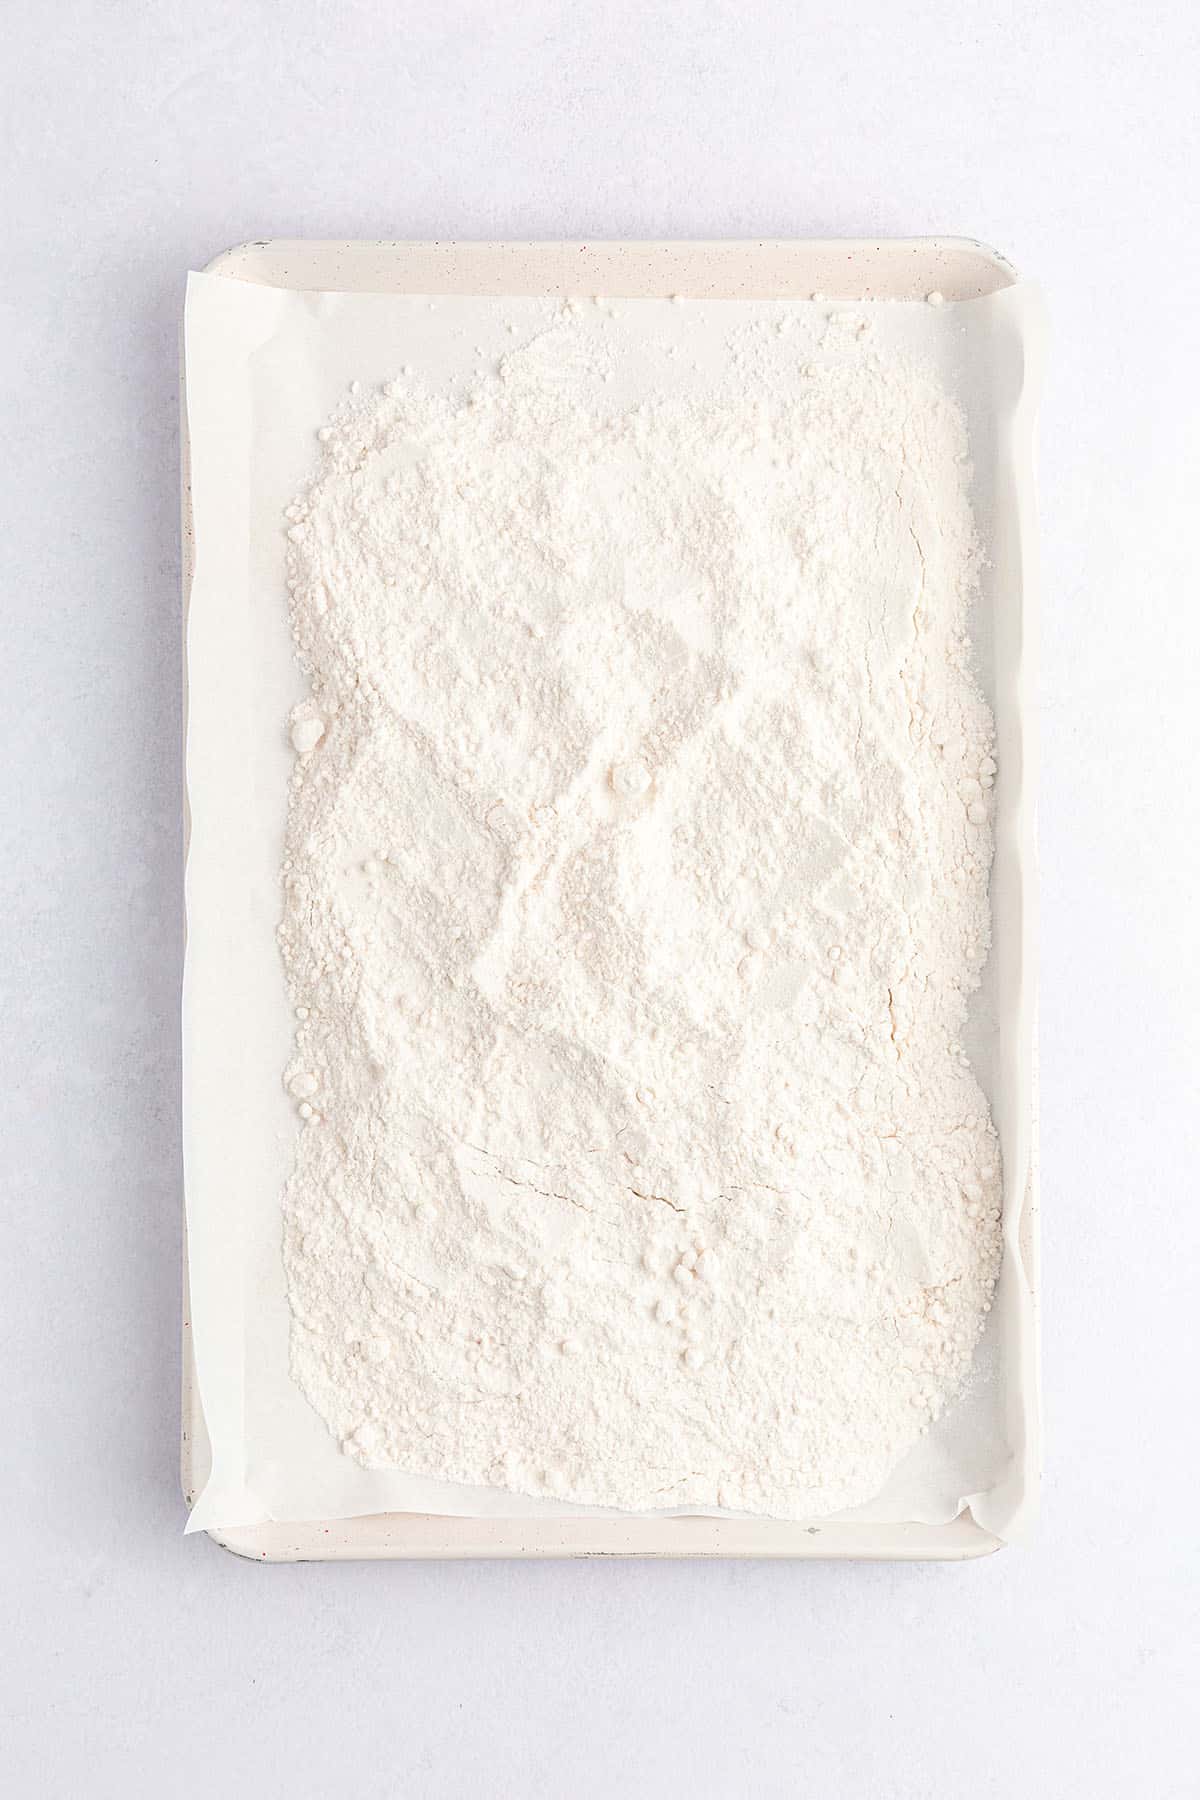 A parchment-lined baking sheet with cake mix powder